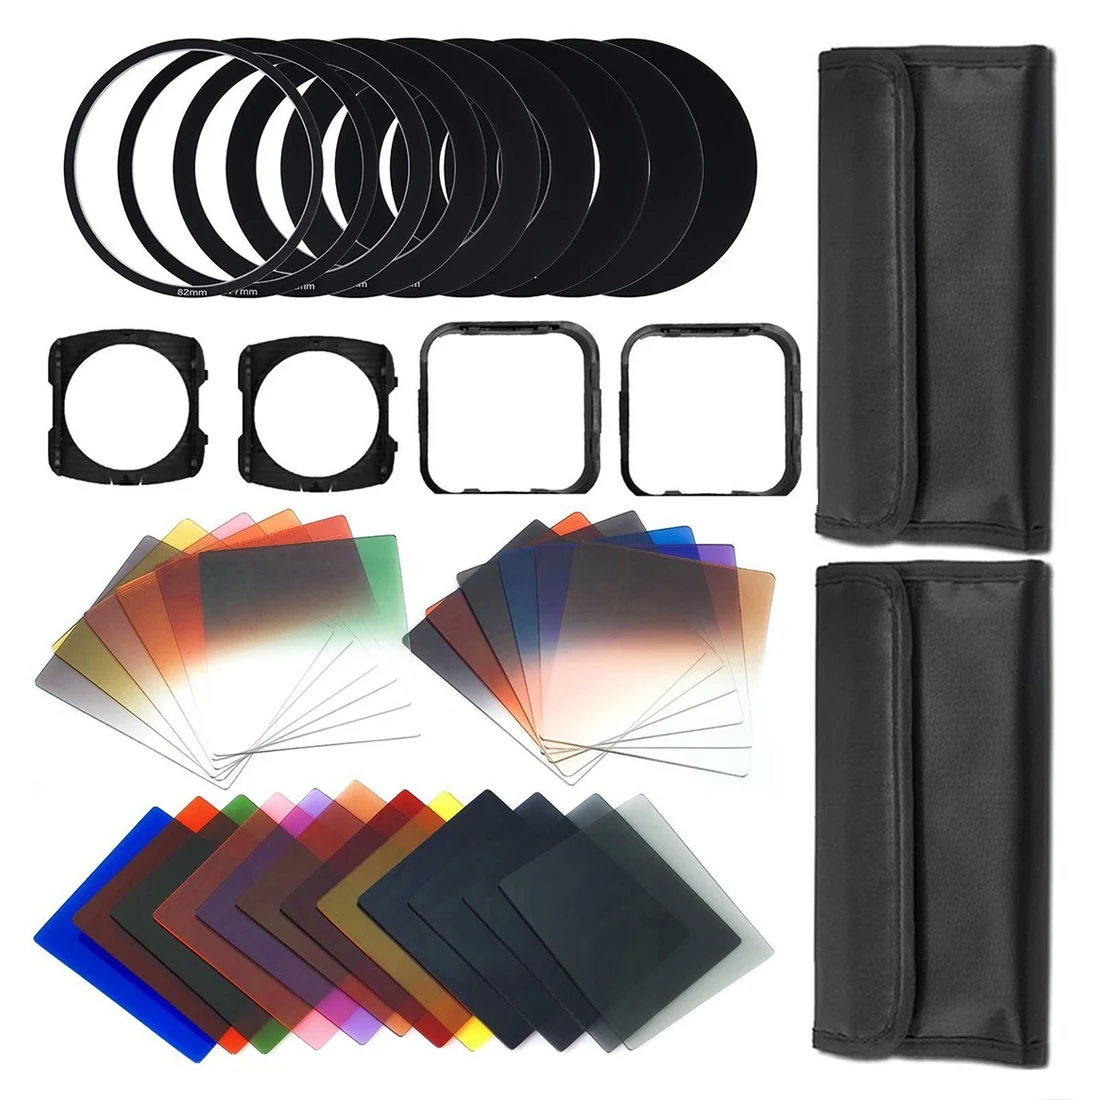 41 Pcs Square gradient lenses + ND Filter Kit Camera Filters for All Lenses by replacing adaptor ring w/Wallet Skin Case